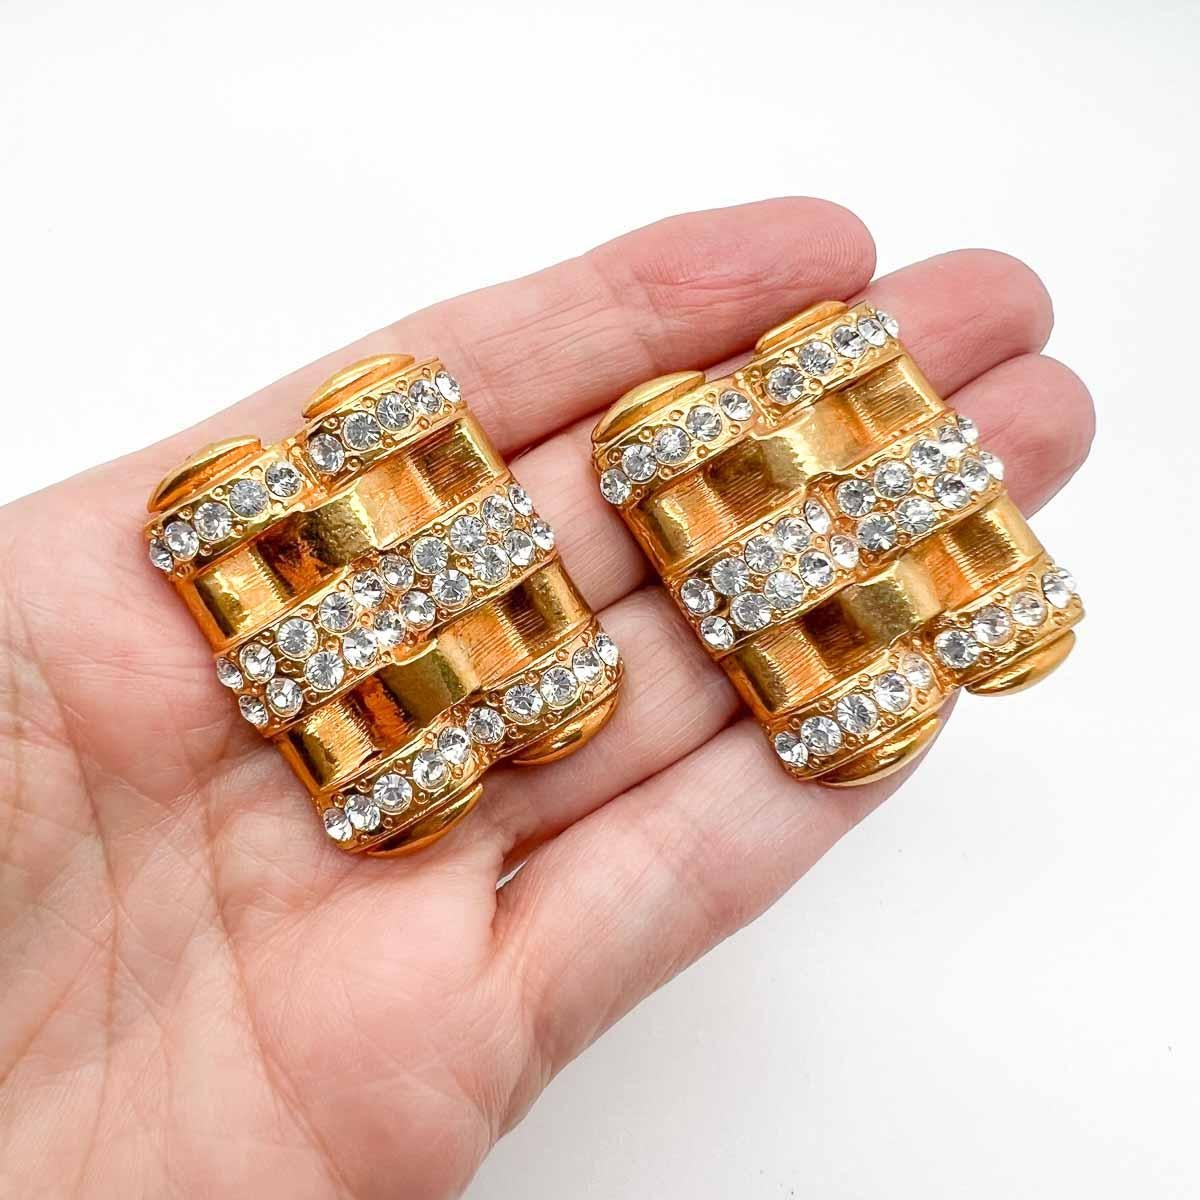 Fabulous style from Butler & Wilson with these Vintage Butler & Wilson Deco Earrings. A large deco style plaque is set with a trio of crystal bars. A stunning statement earring that will effortlessly transcend day to night for you exuding a look of